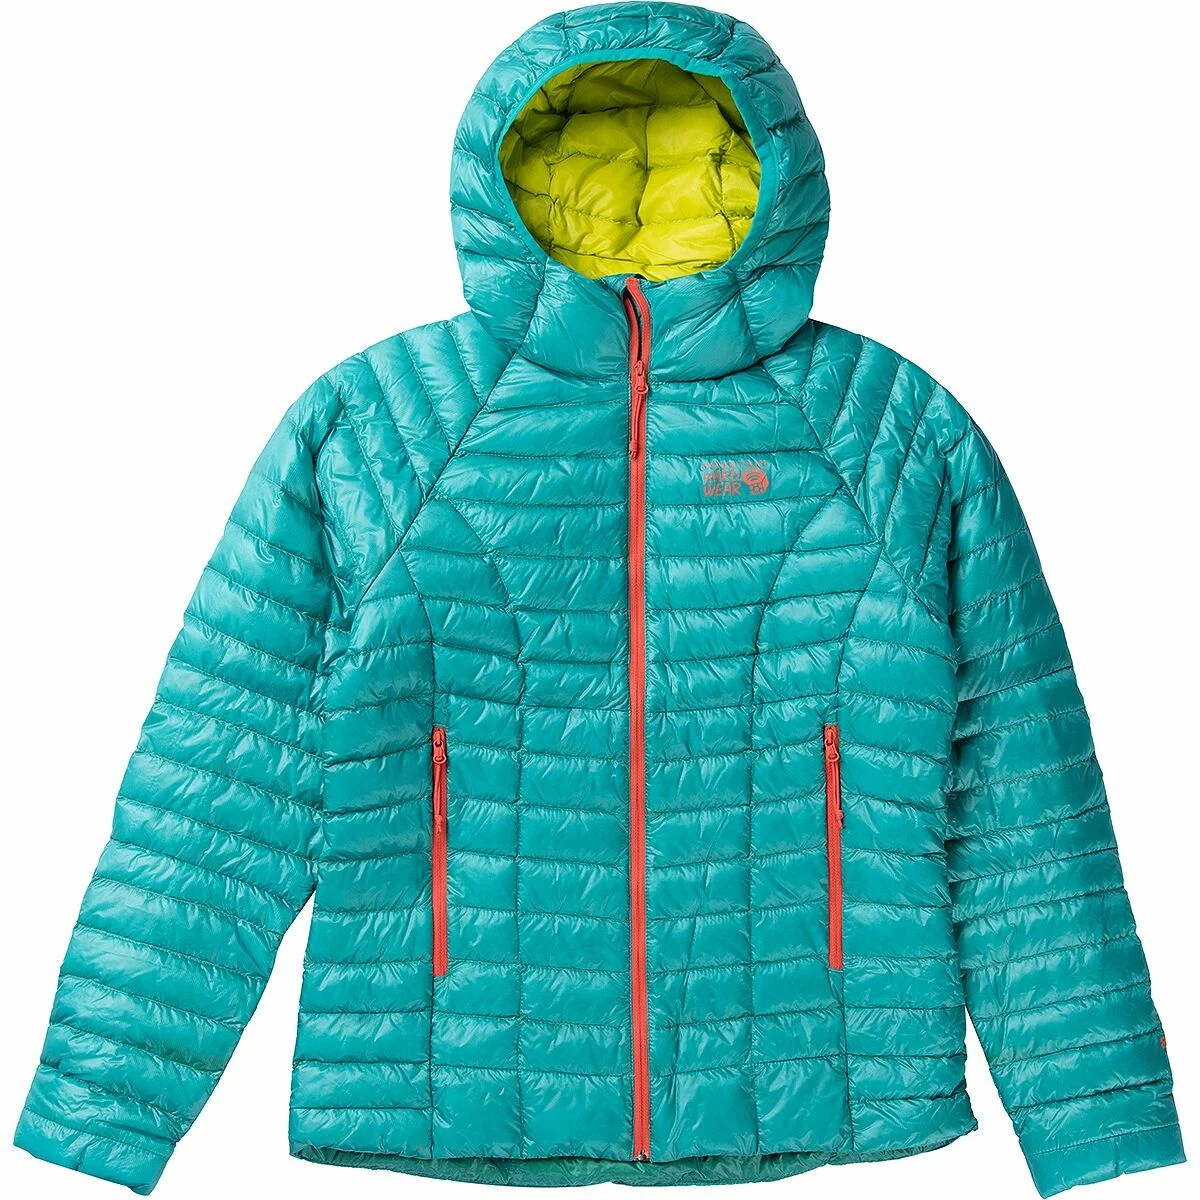 Mountain Hardwear Ghost Whisperer 2 Hooded Down Jacket for extreme cold